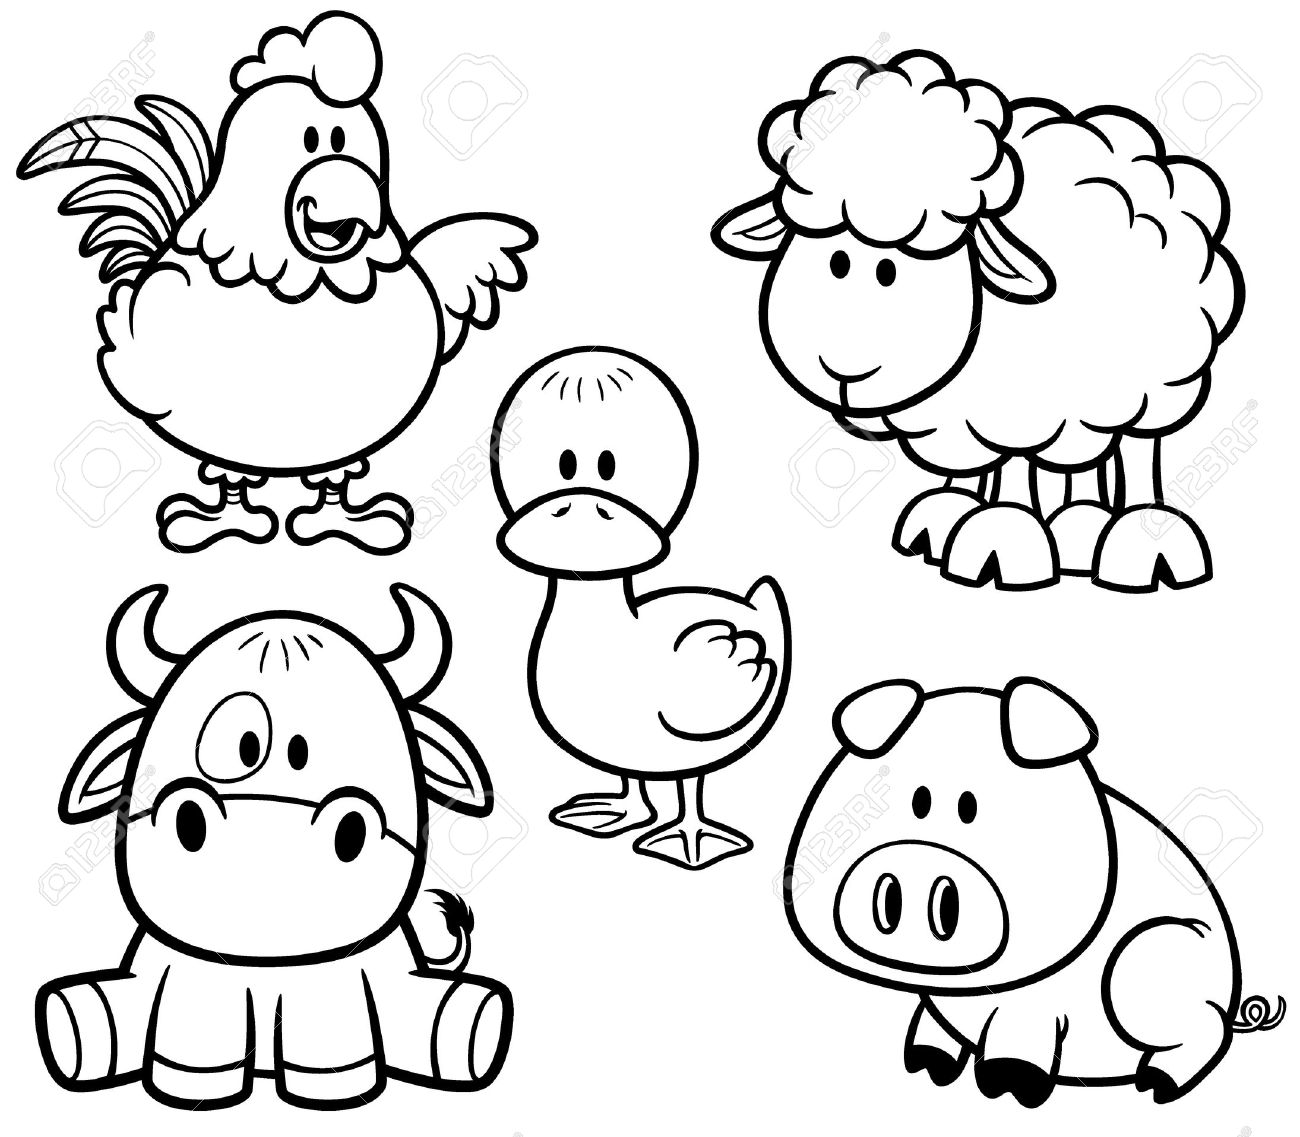 Cute Baby Farm Animal Coloring Pages ~ Best Coloring Pages ...